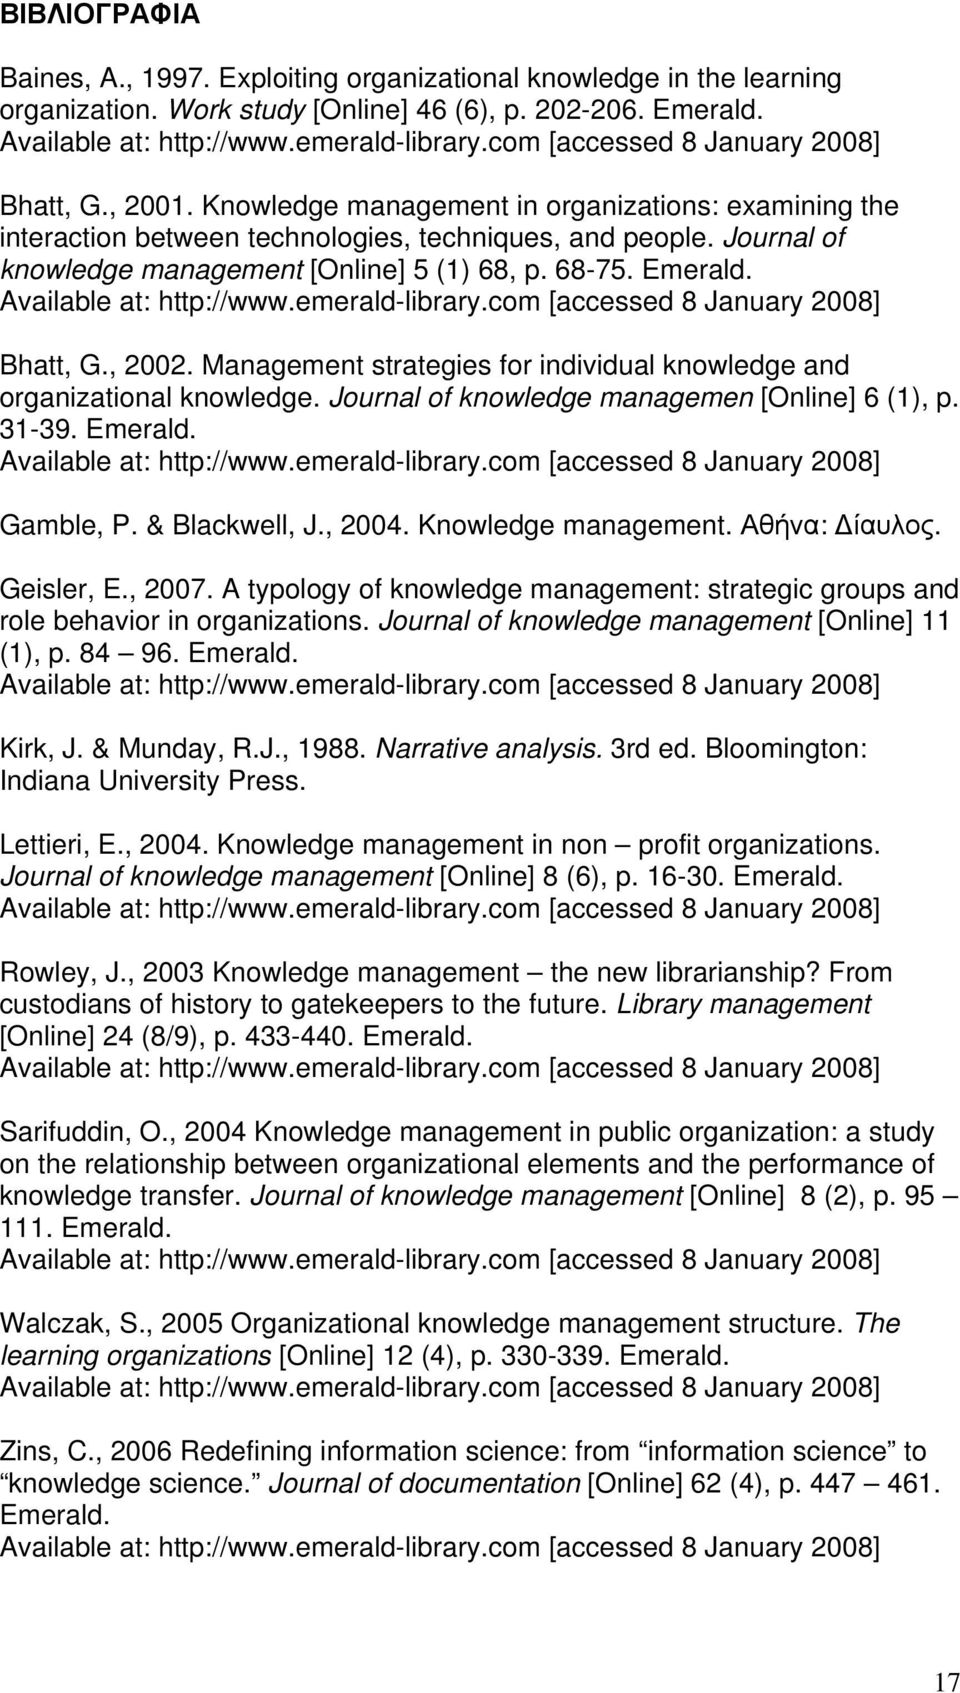 Management strategies for individual knowledge and organizational knowledge. Journal of knowledge managemen [Online] 6 (1), p. 31-39. Emerald. Gamble, P. & Blackwell, J., 2004. Knowledge management.